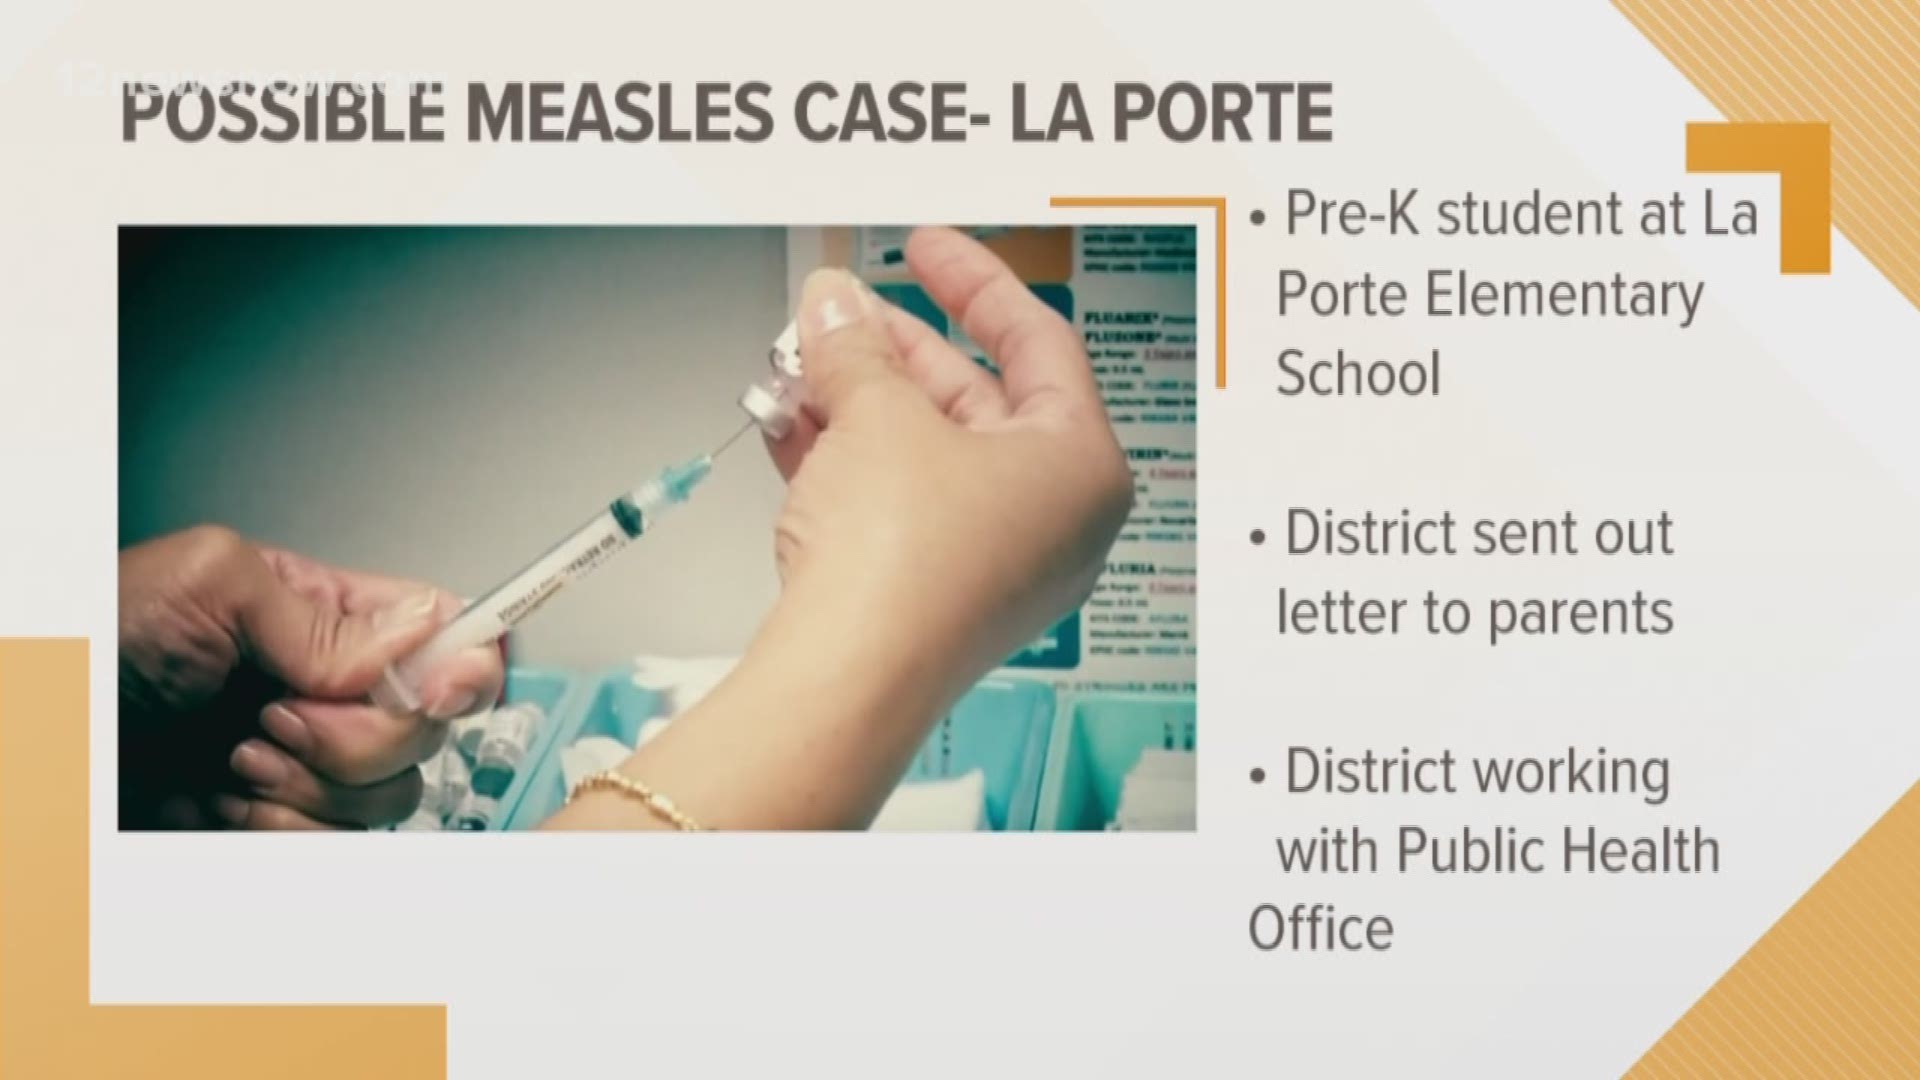 With five confirmed cases in Harris County and over 100 worldwide, La Porte school officials decided to take precautionary measures after suspecting a student of having measles.